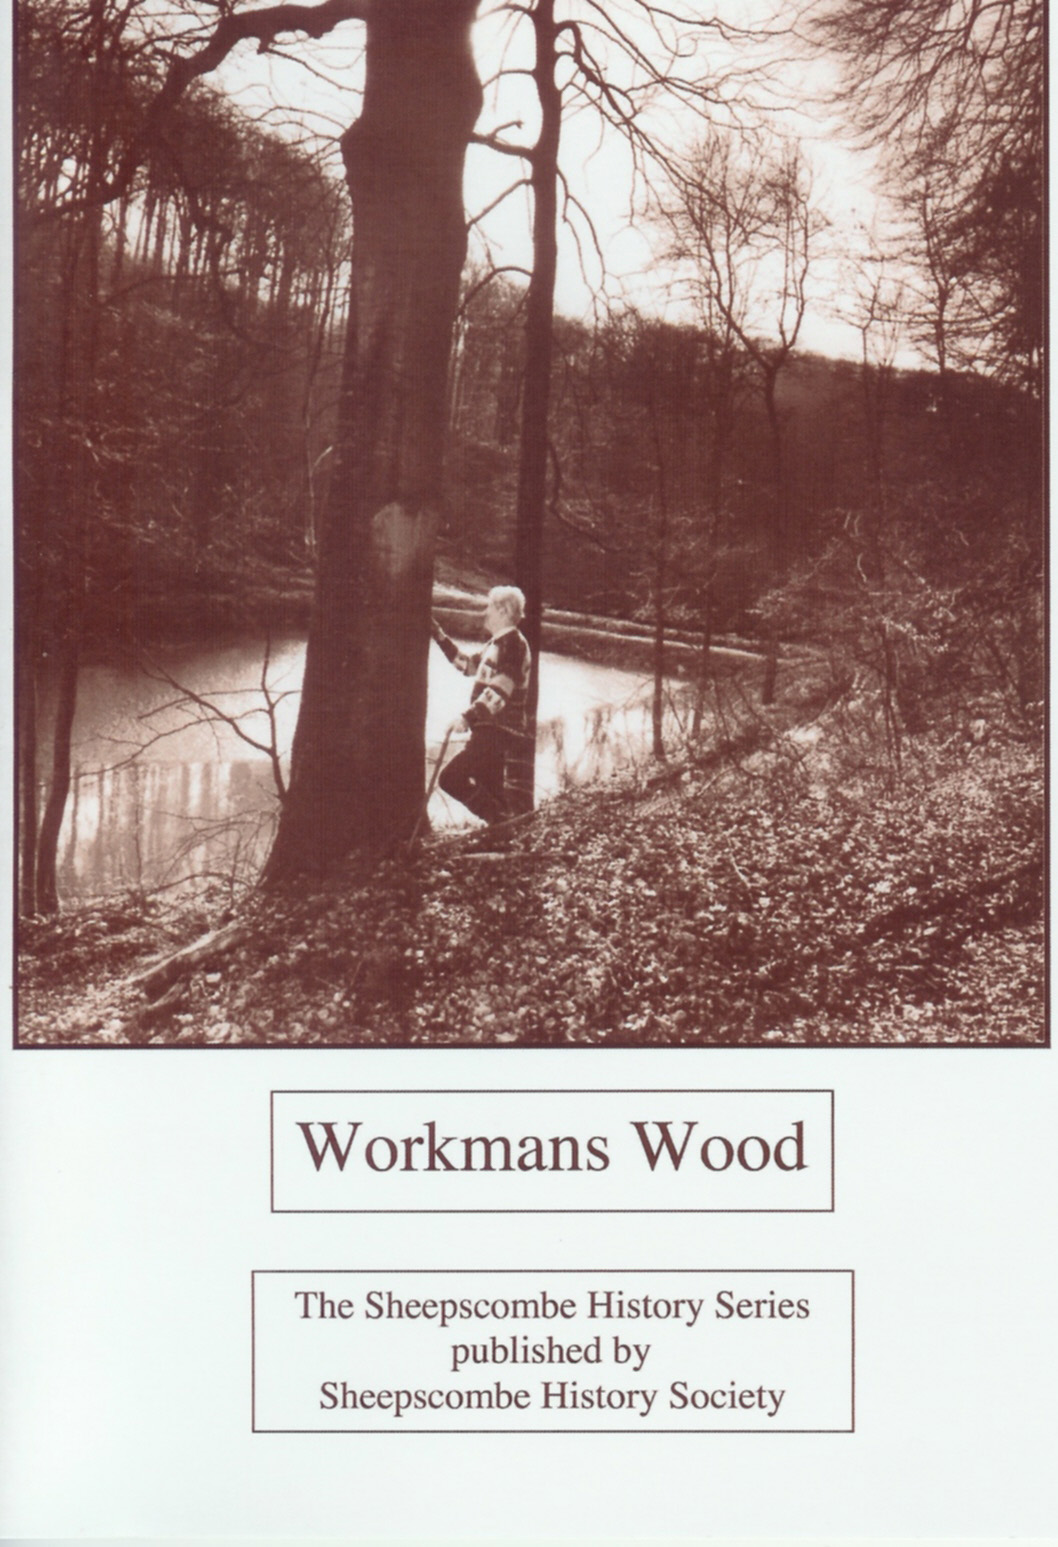 Workmans Wood book cover